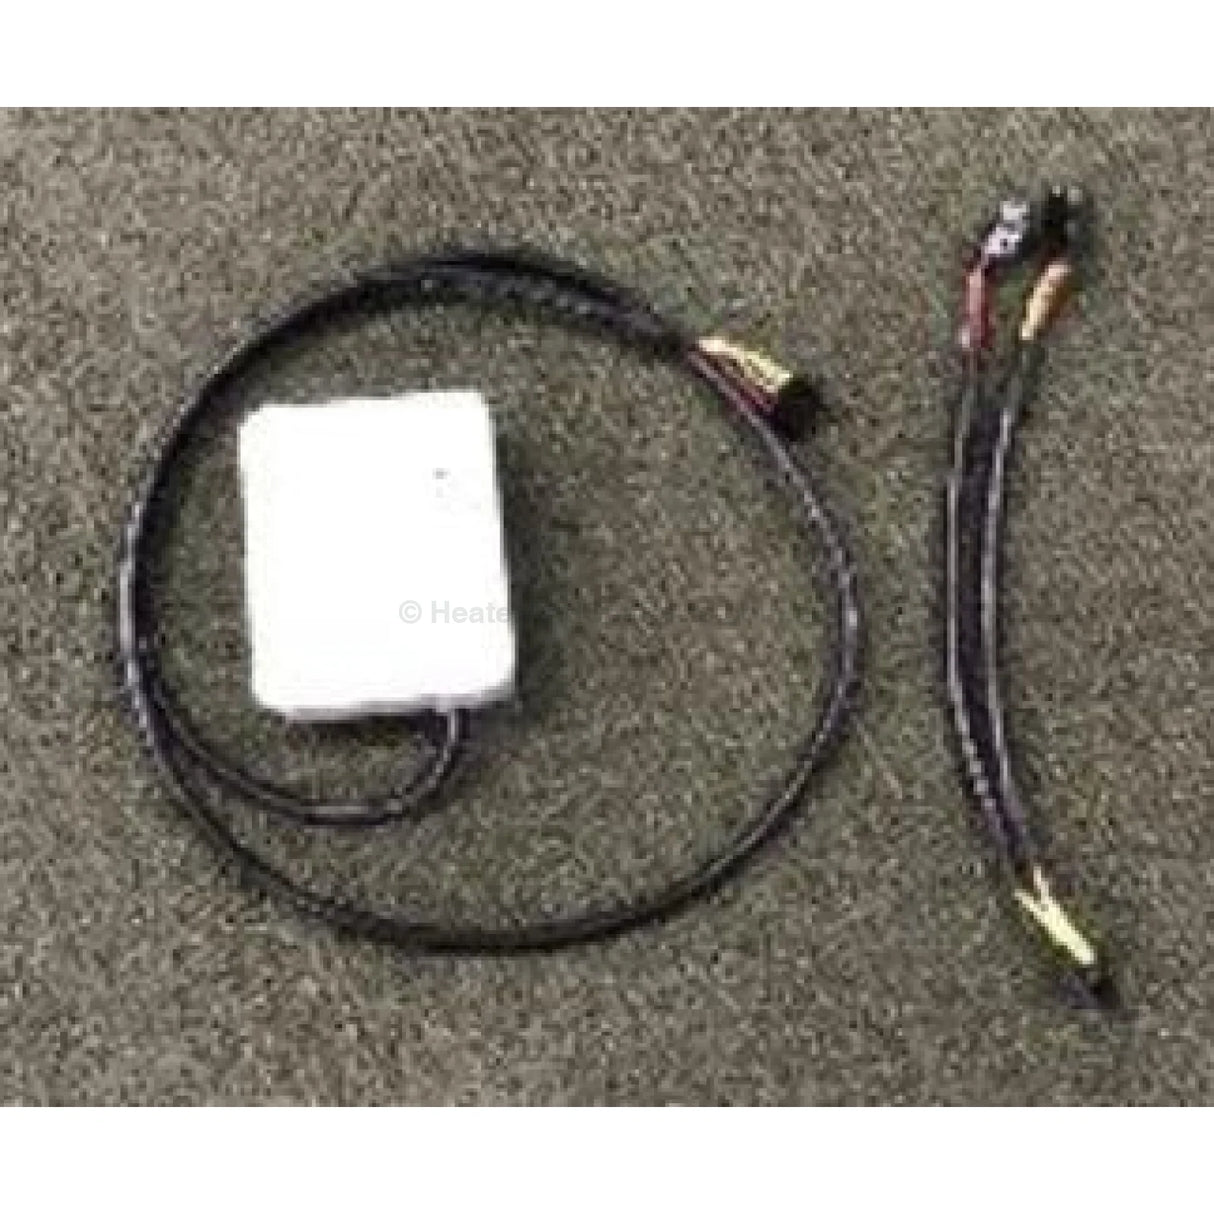 WiFi Module for Astralpool Heat Pumps - No Longer Available - Heater and Spa Parts